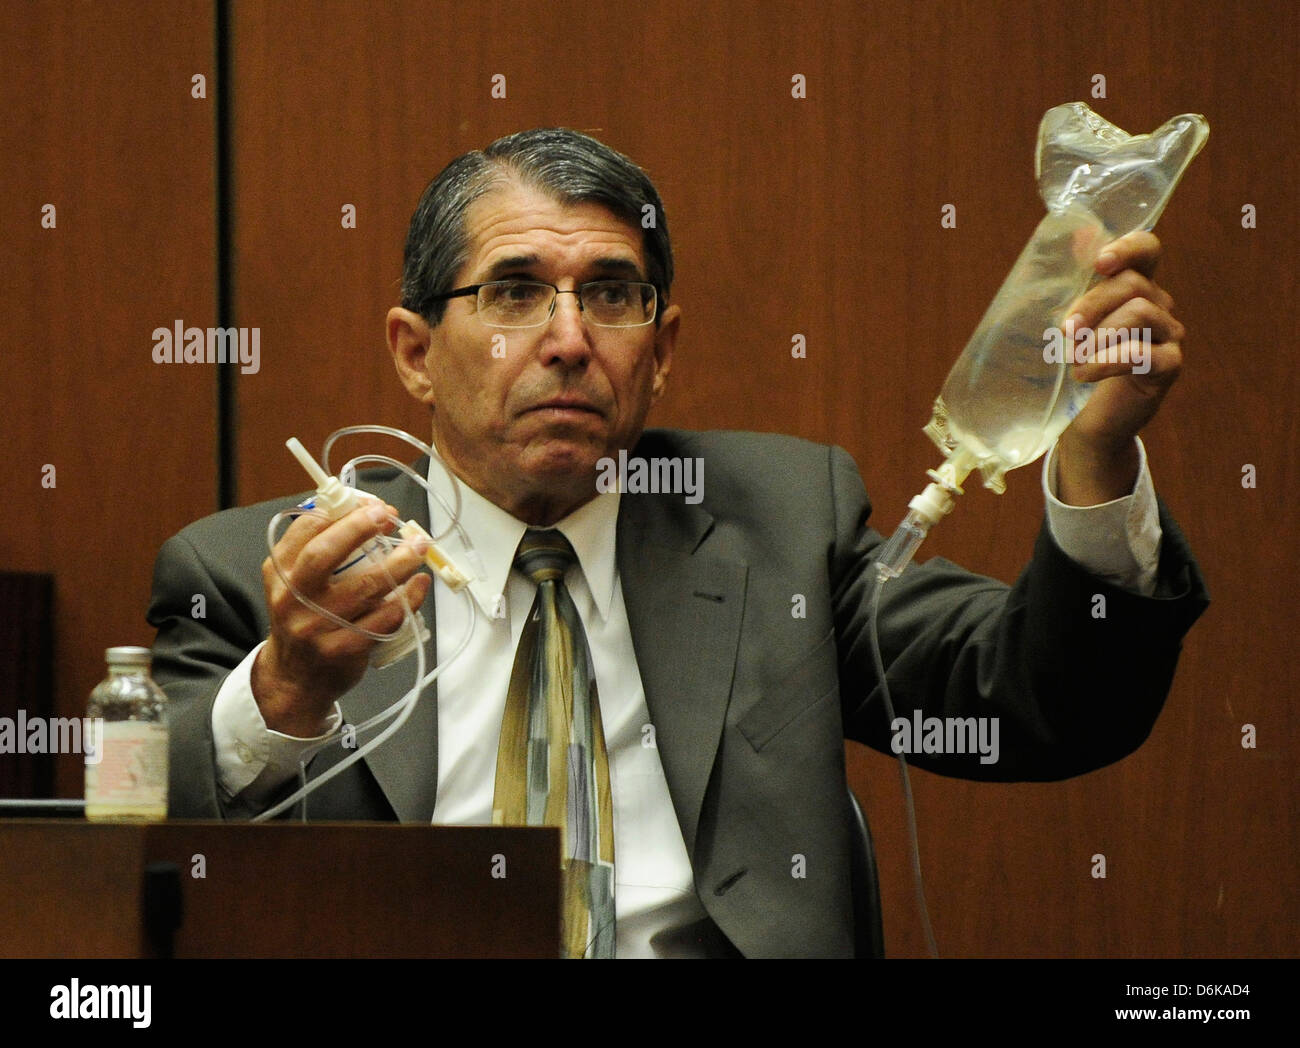 Dr. Paul White an anesthesiologist and propofol expert, holds up an IV drip during the final stage of Dr. Conrad Murray's Stock Photo